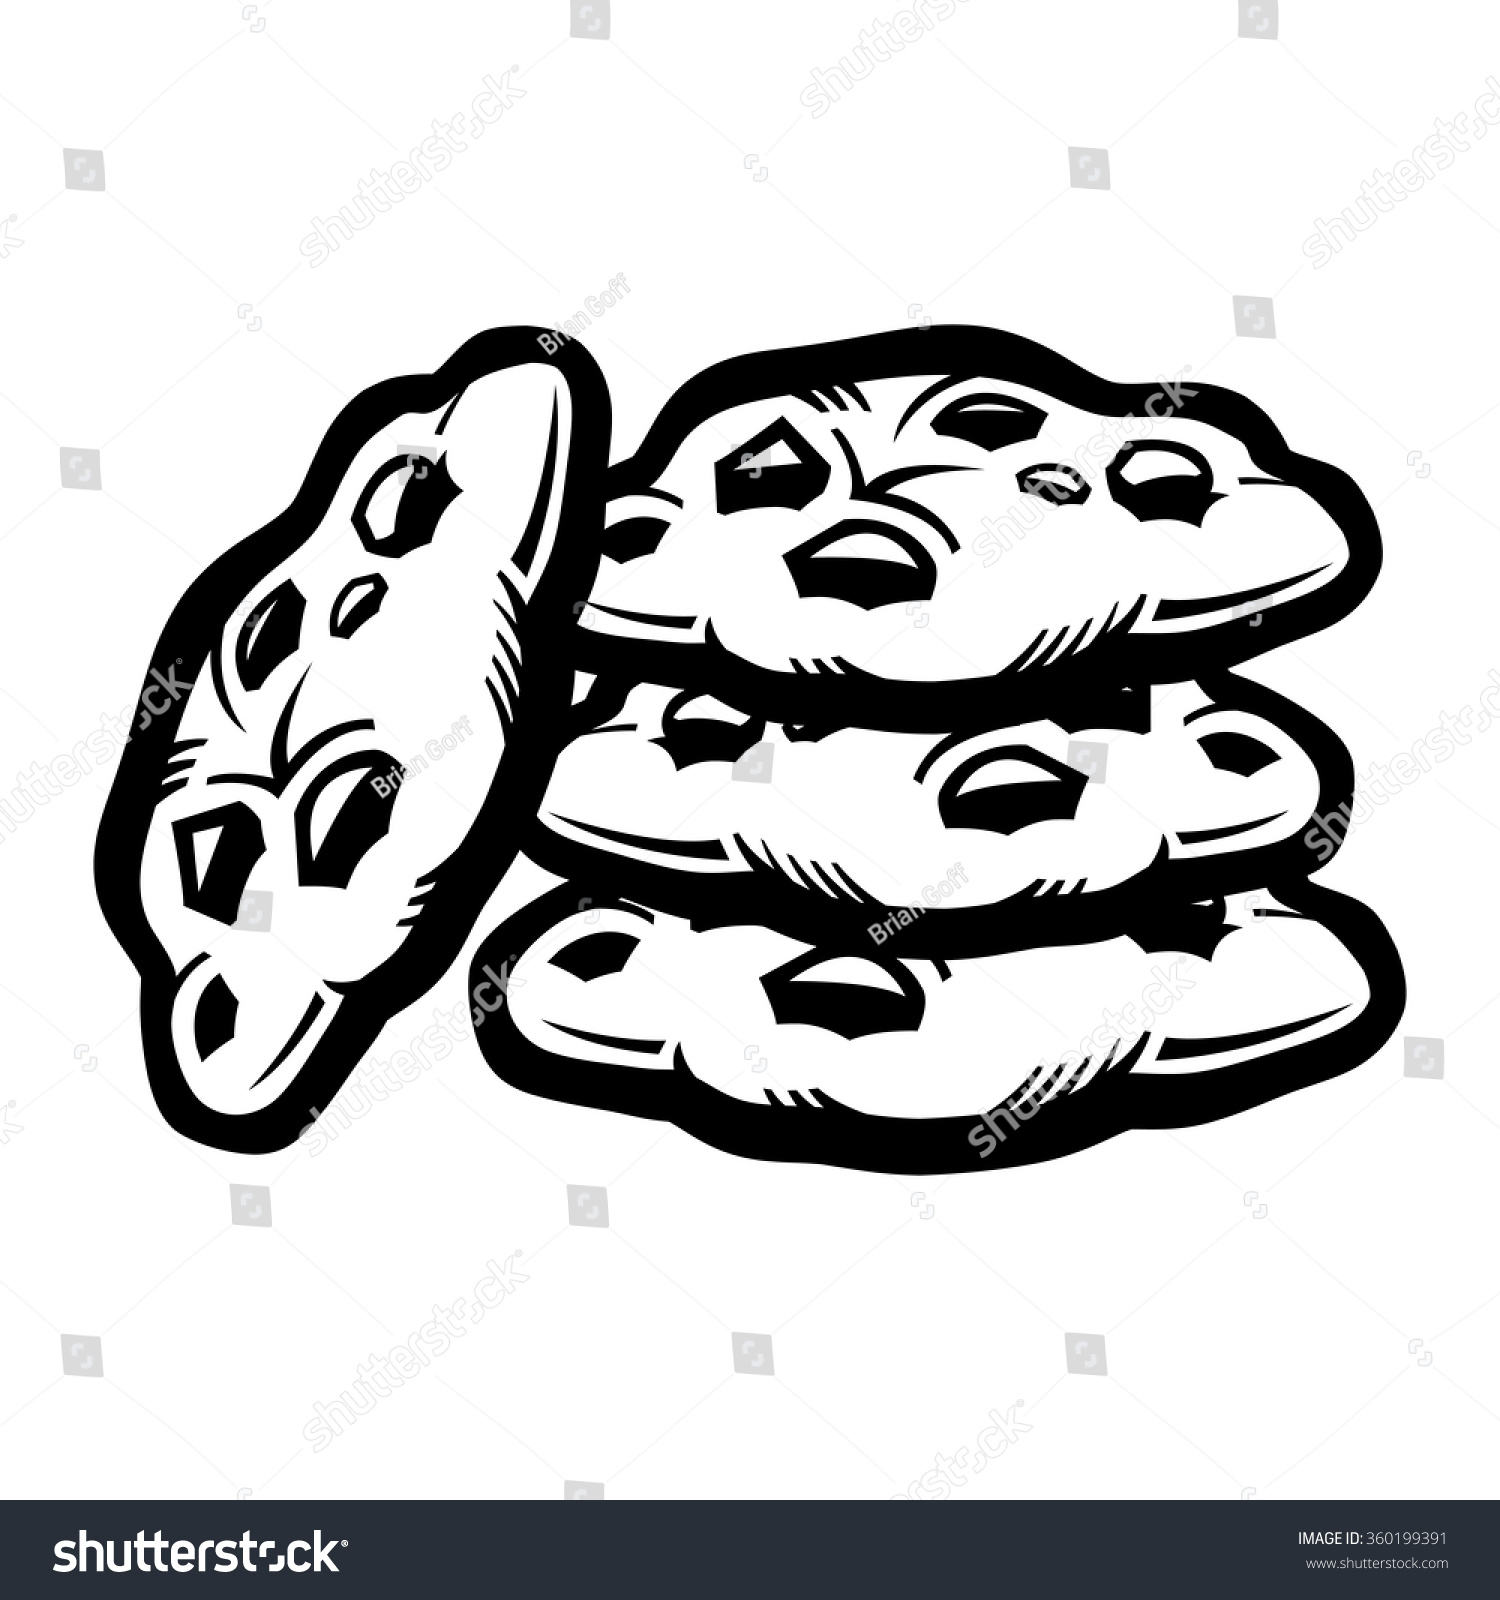 free cookie clipart black and white - photo #42